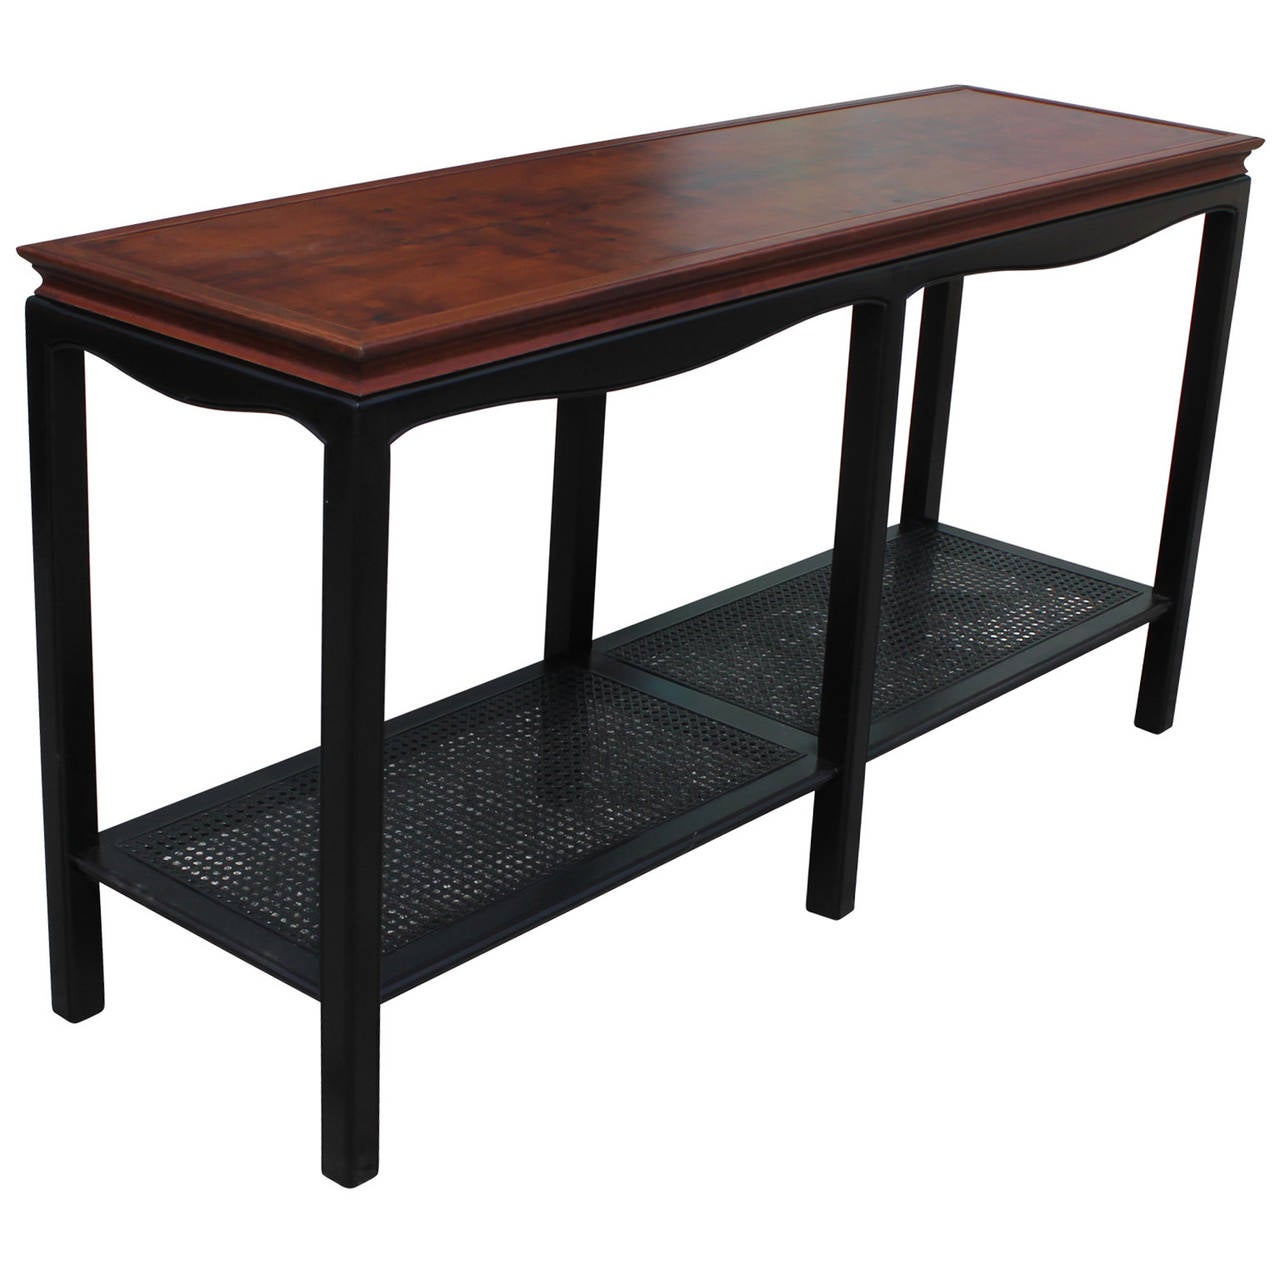 Great Walnut console table with a caned bottom. The bottom of the console has been black lacquered. In the style of Baker furniture designed by Michael Taylor.